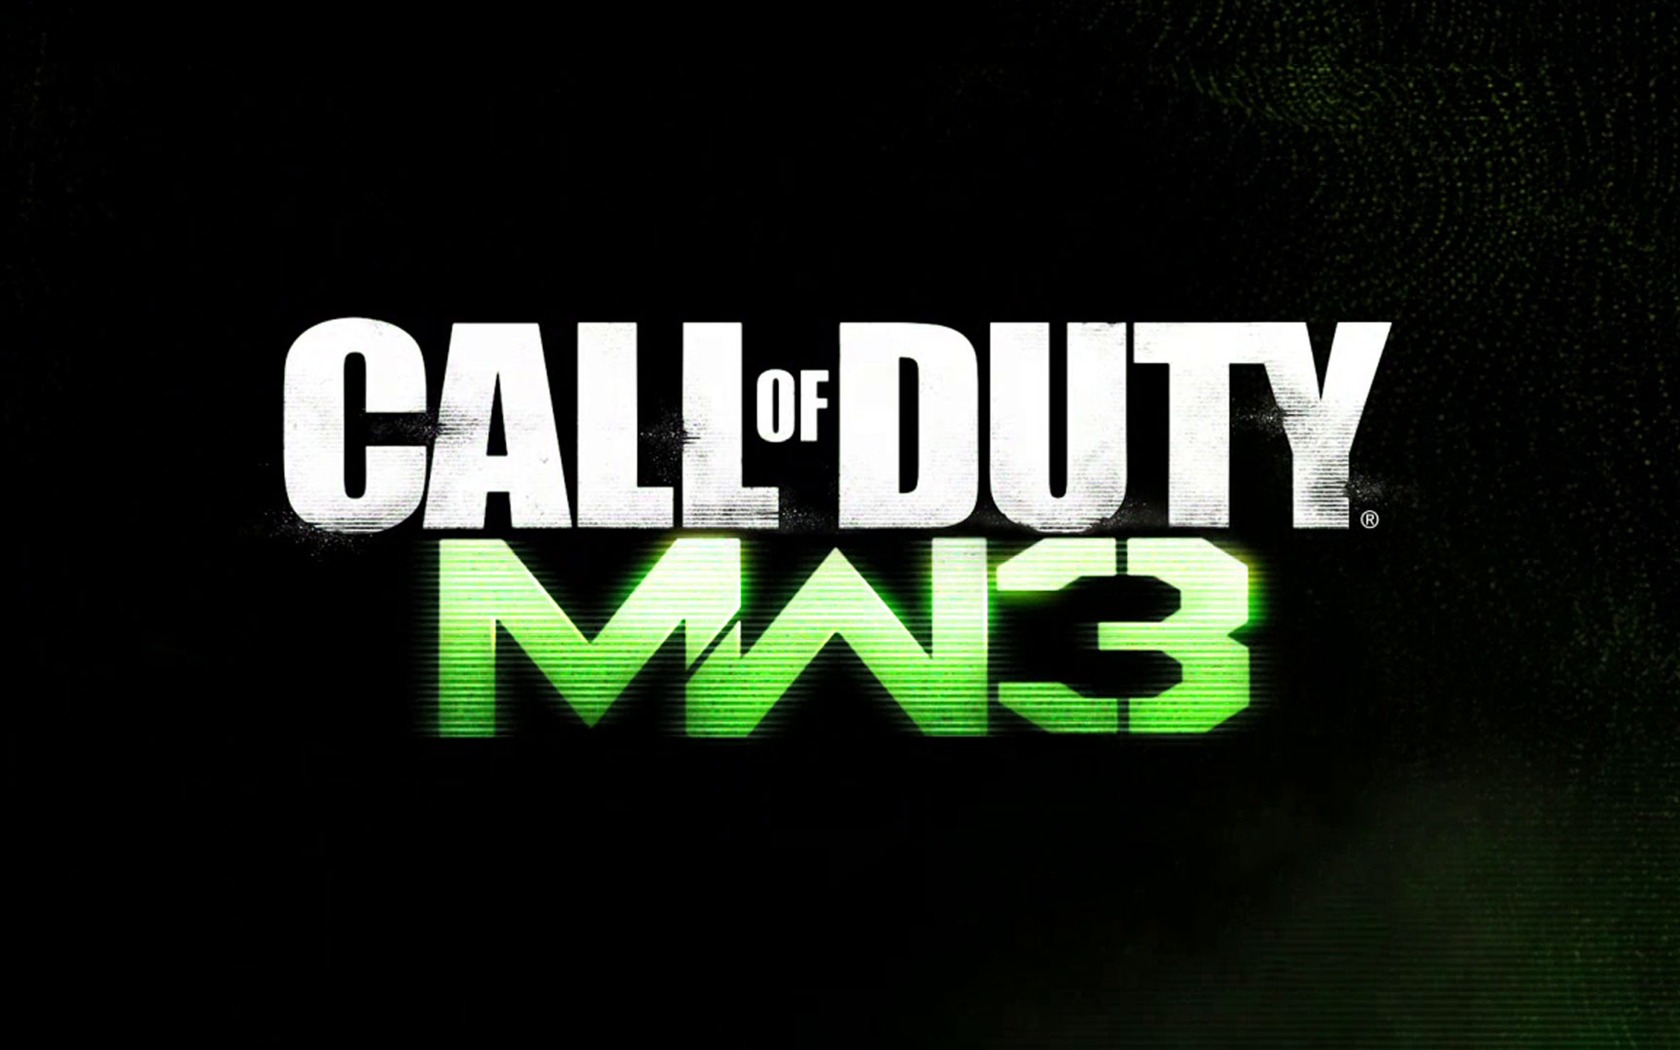 Call of Duty: MW3 wallpapers HD #9 - 1680x1050